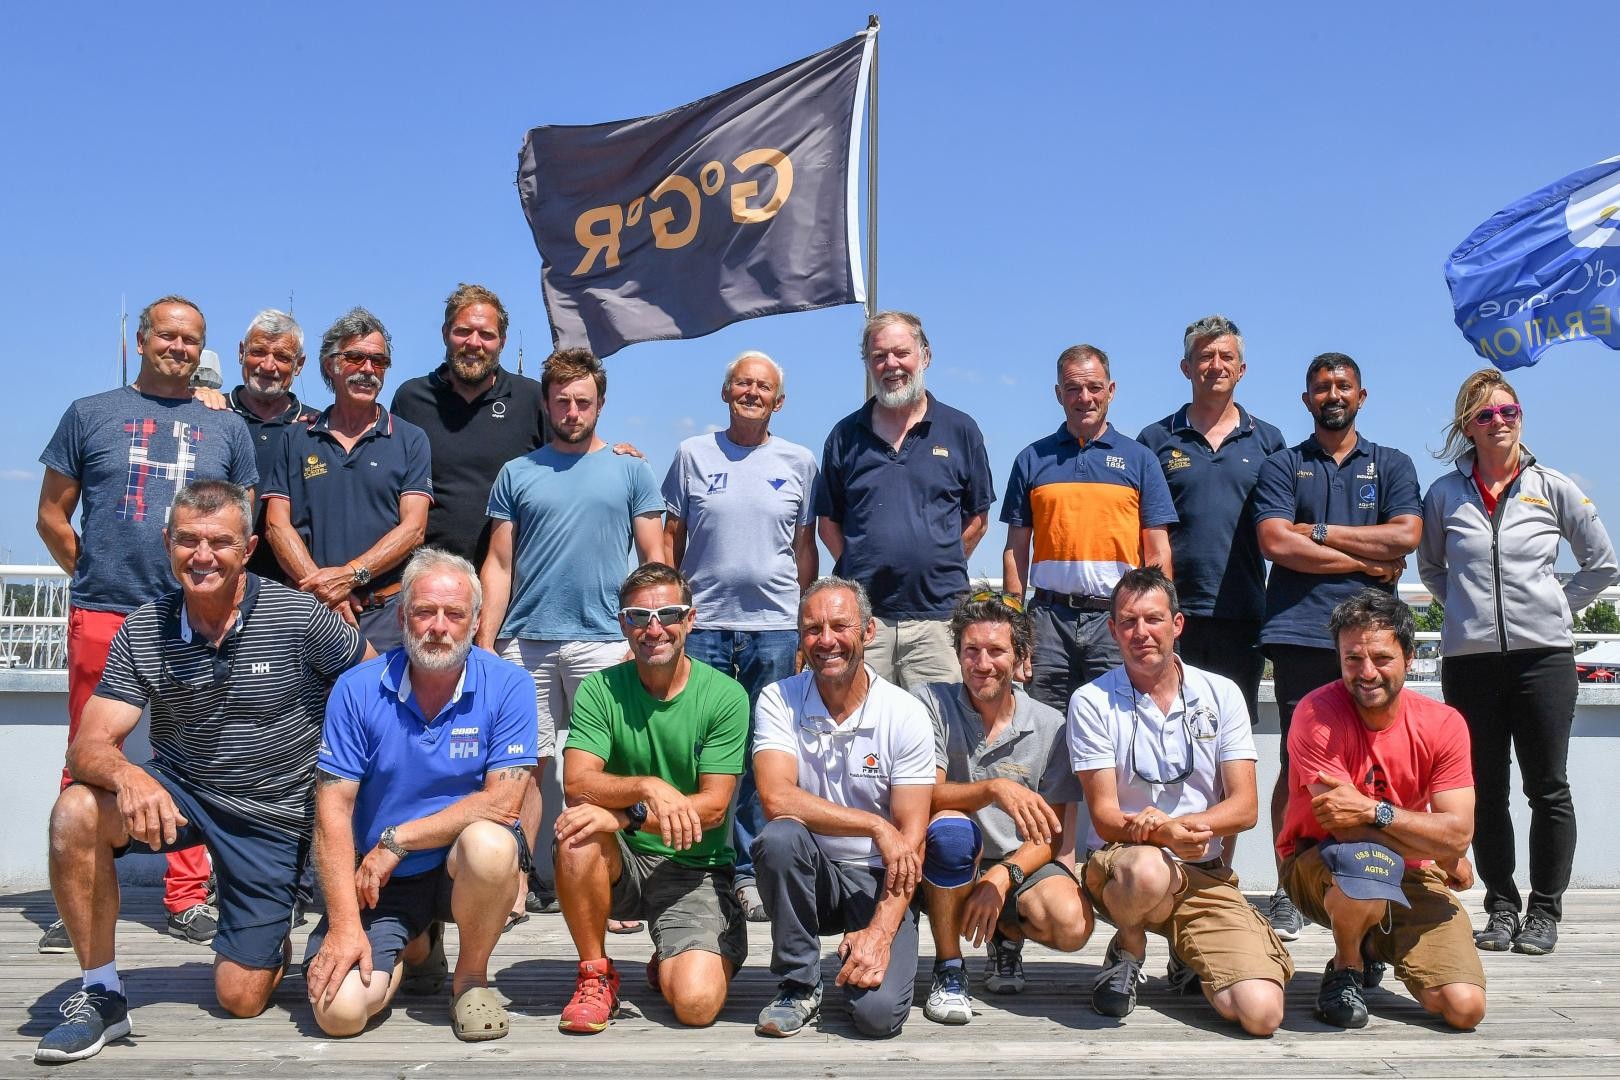 All the GGR skippers bar Kevin Fairbrother will all be attending the GGR Prize giving celebrations in Les Sables d'Olonne over the Easter Weekend.